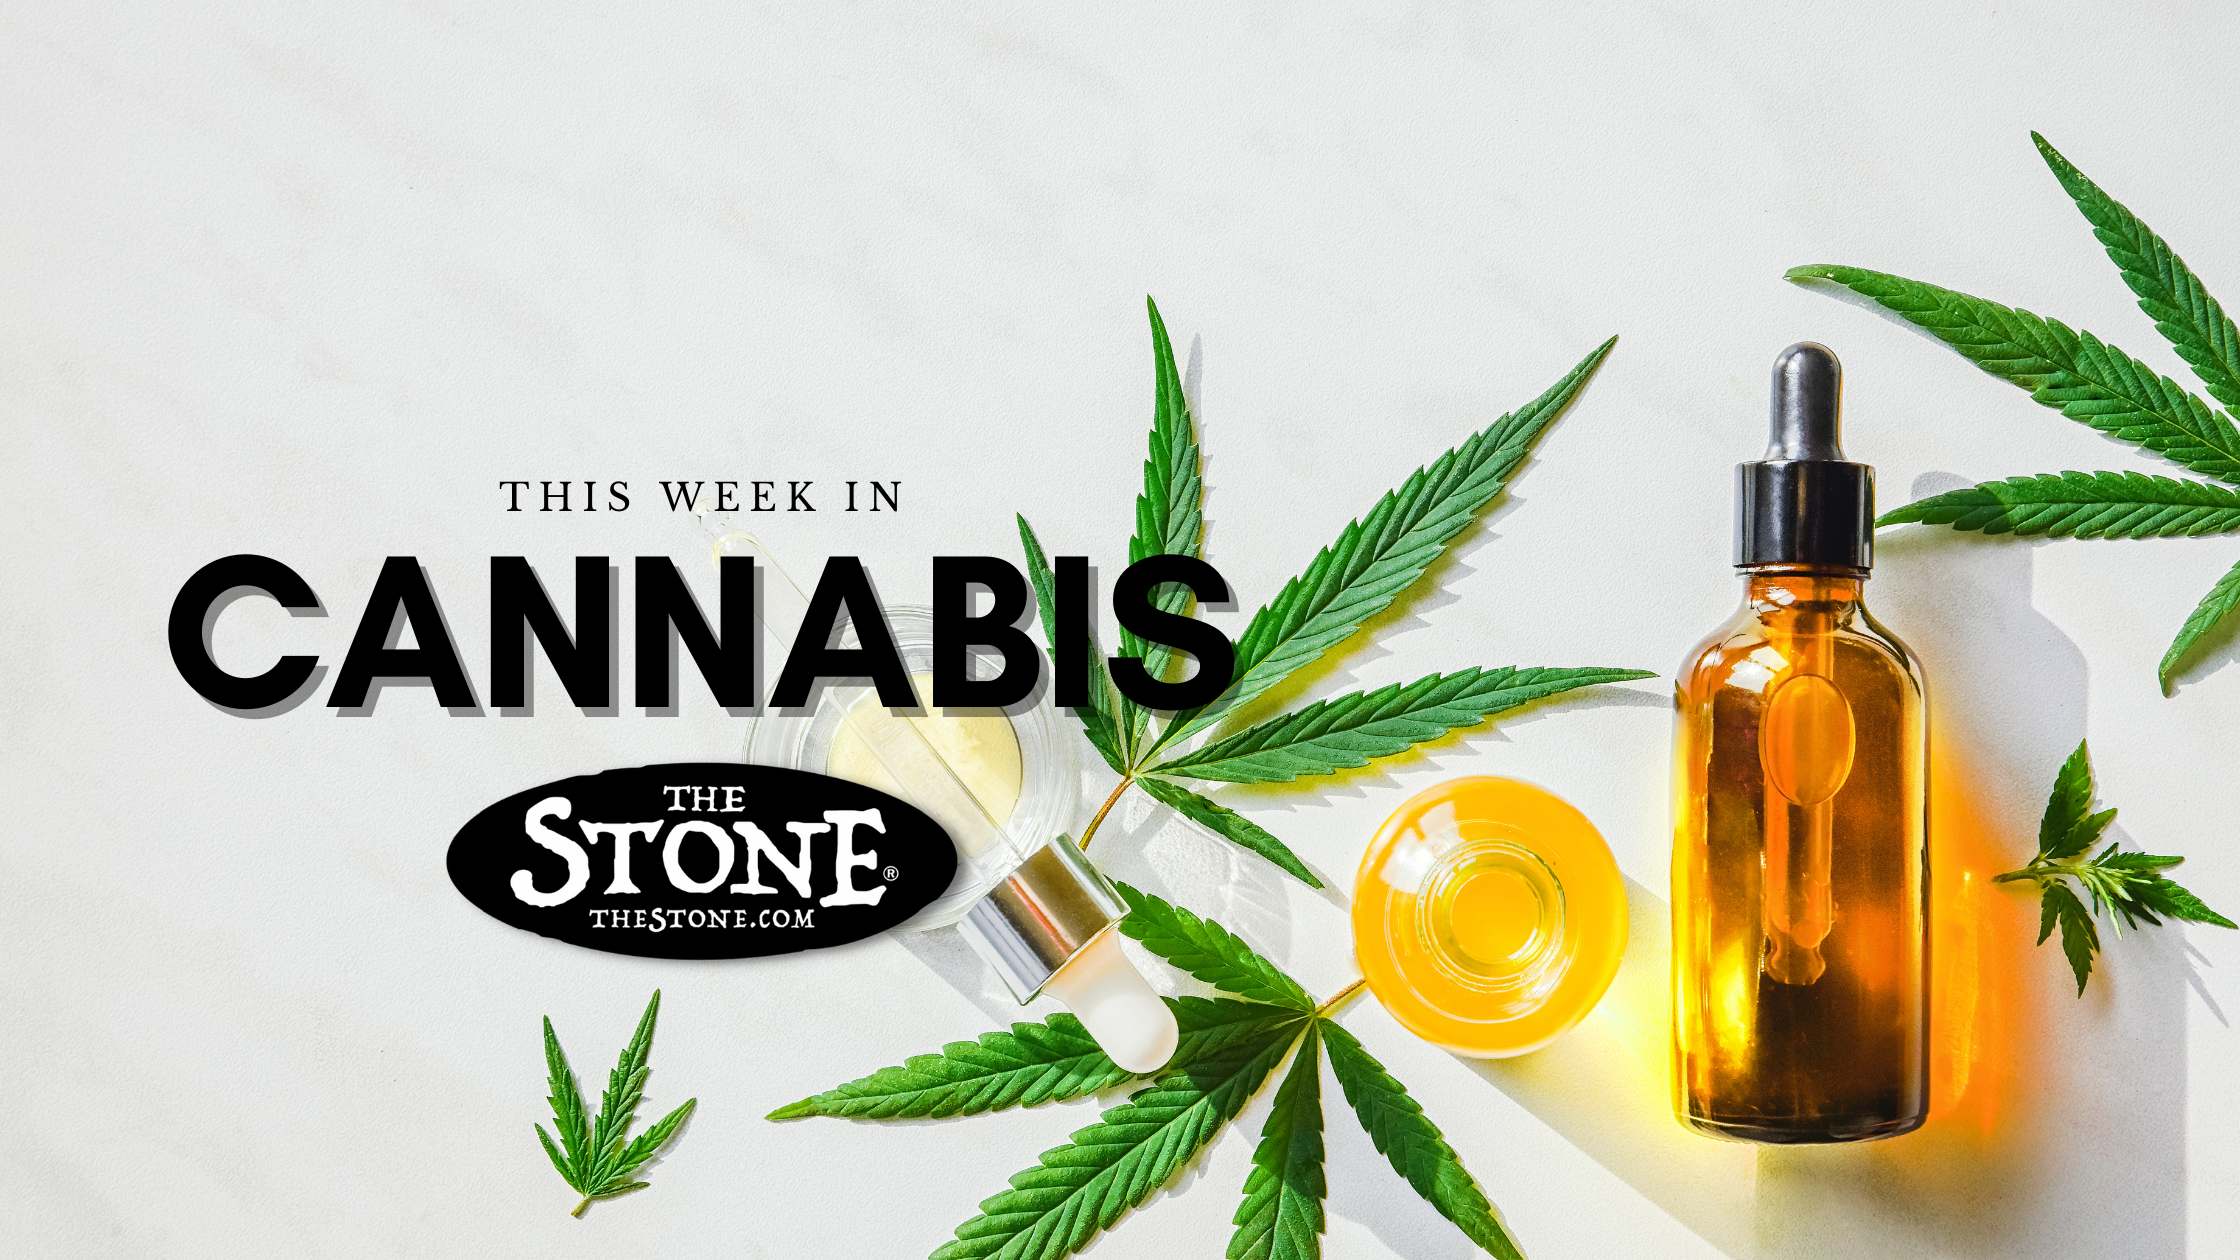 This Week in Cannabis at The Stone Dispensary Promo Image